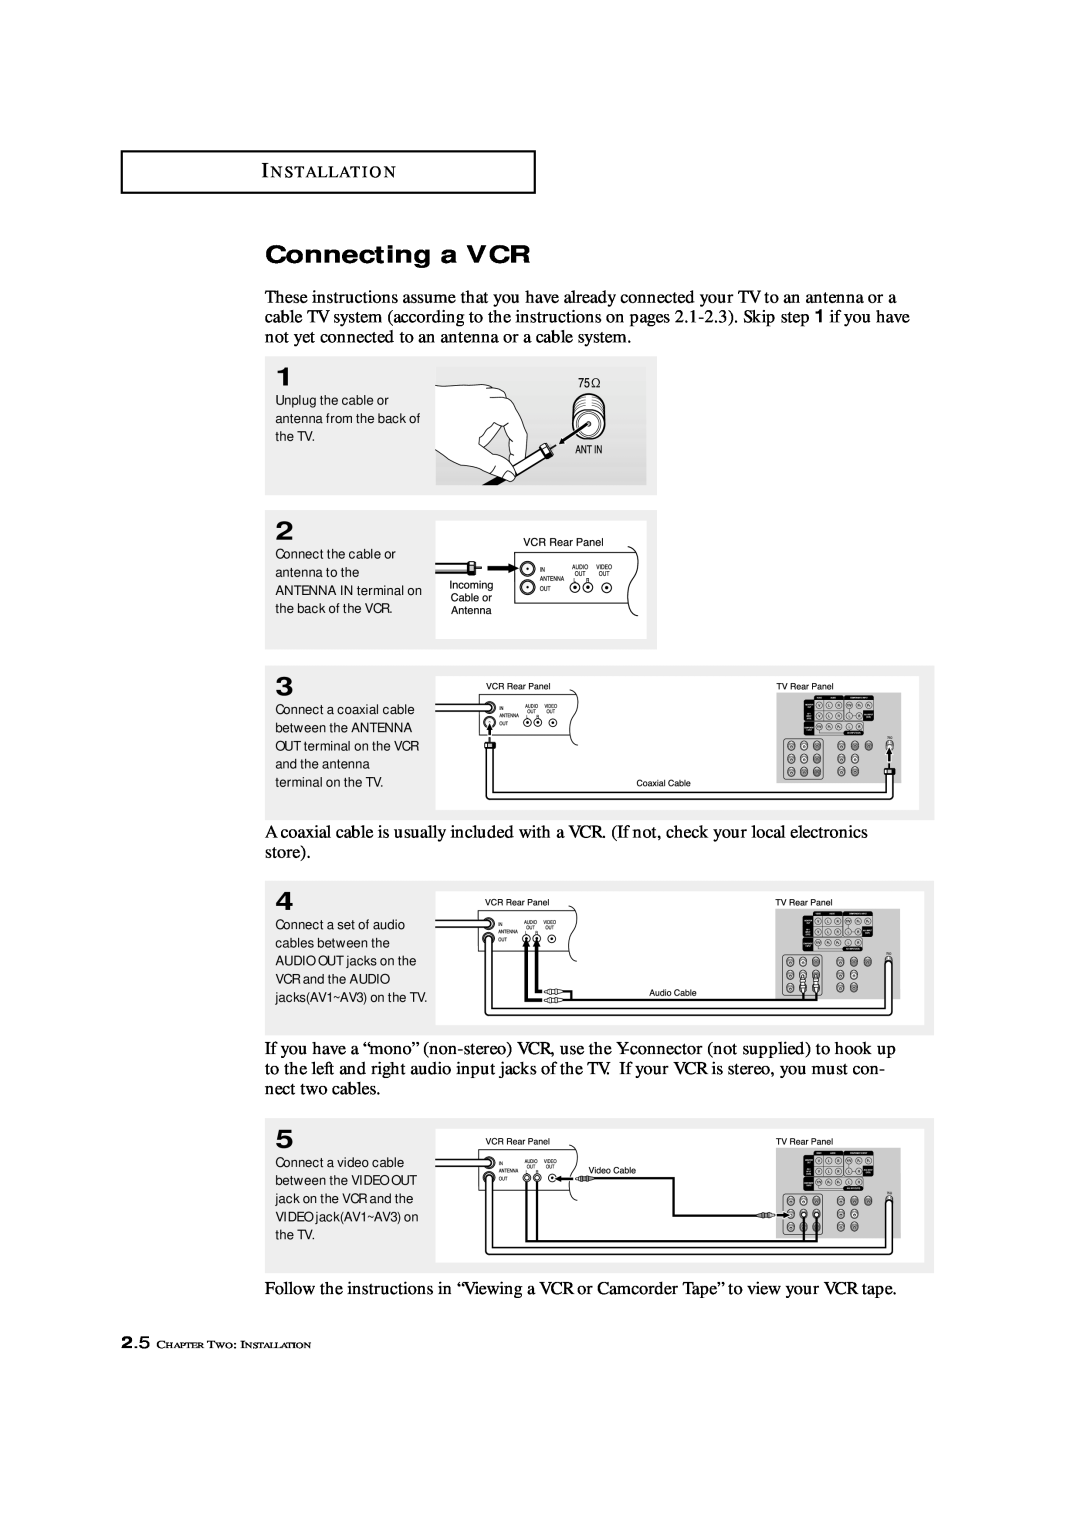 Samsung TXM 3298HF, TXM 2796HF, TXM 3098WHF manual Connecting a VCR, Unplug the cable or antenna from the back of the TV 